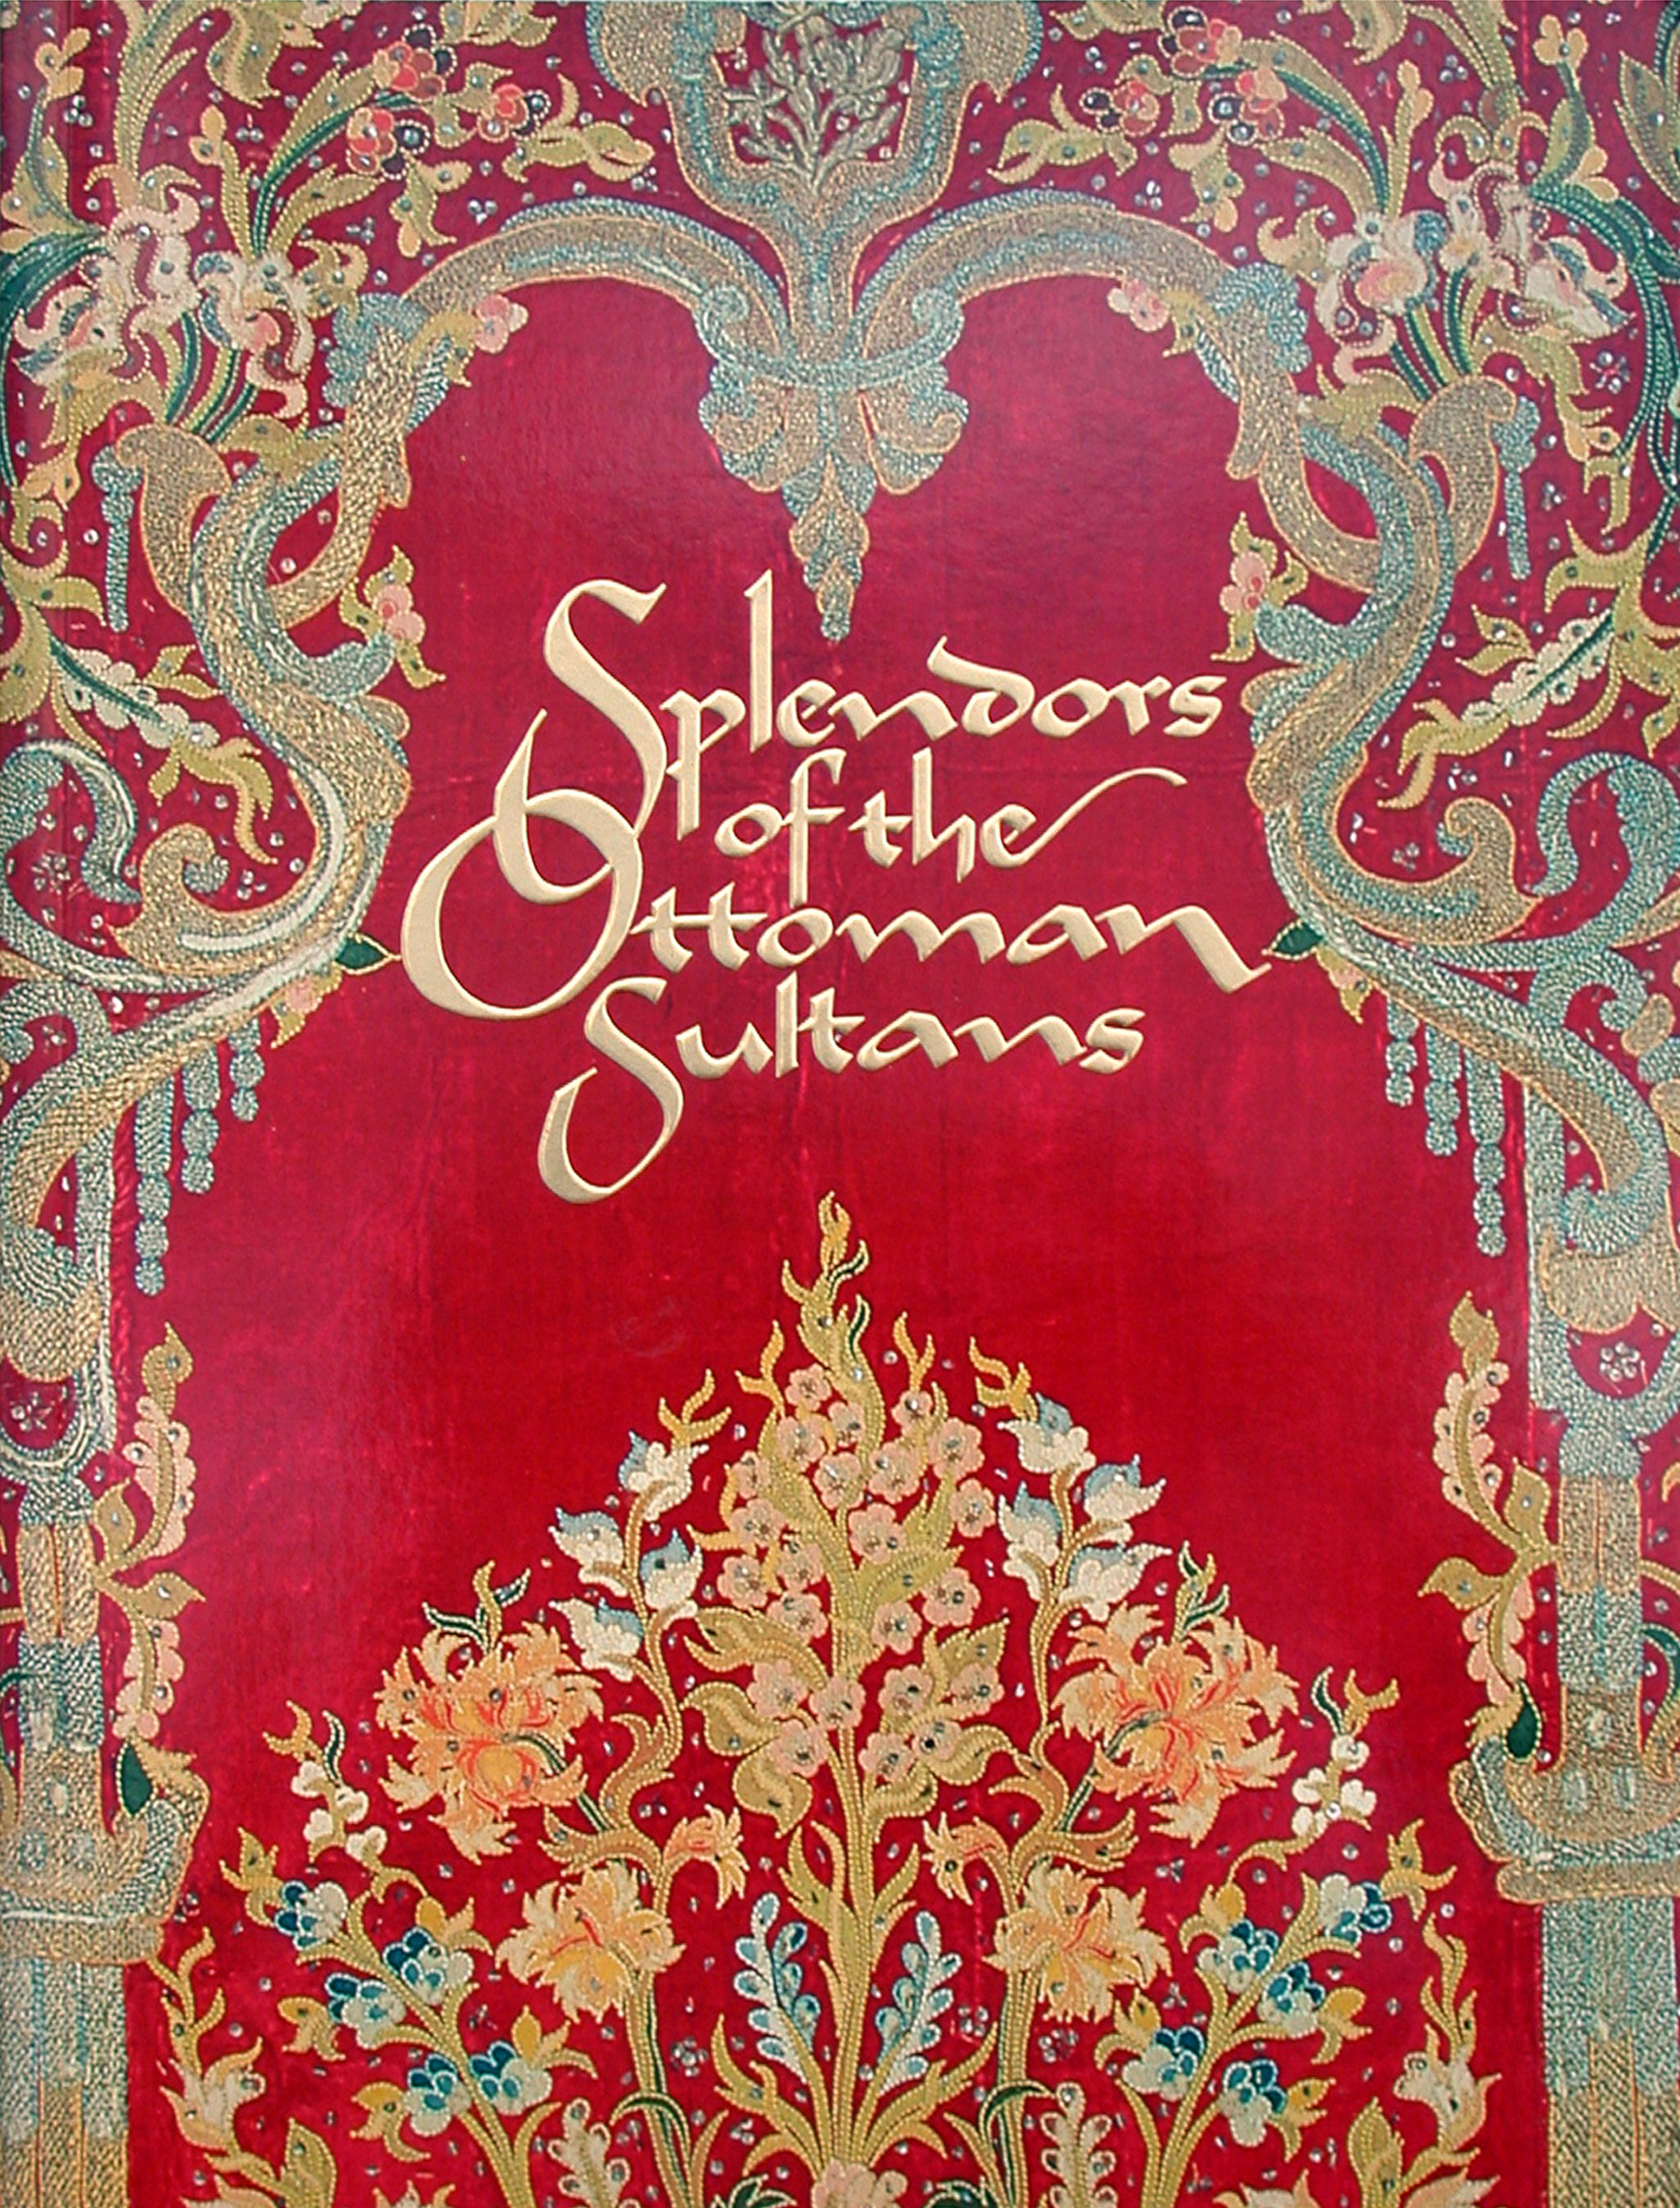  Wonders Series Exhibit  Splendors of the Ottoman Sultans  Exhibition catalog  Creative direction and design by Chuck Mitchell  Calligraphy by Elizabeth Mitchell 